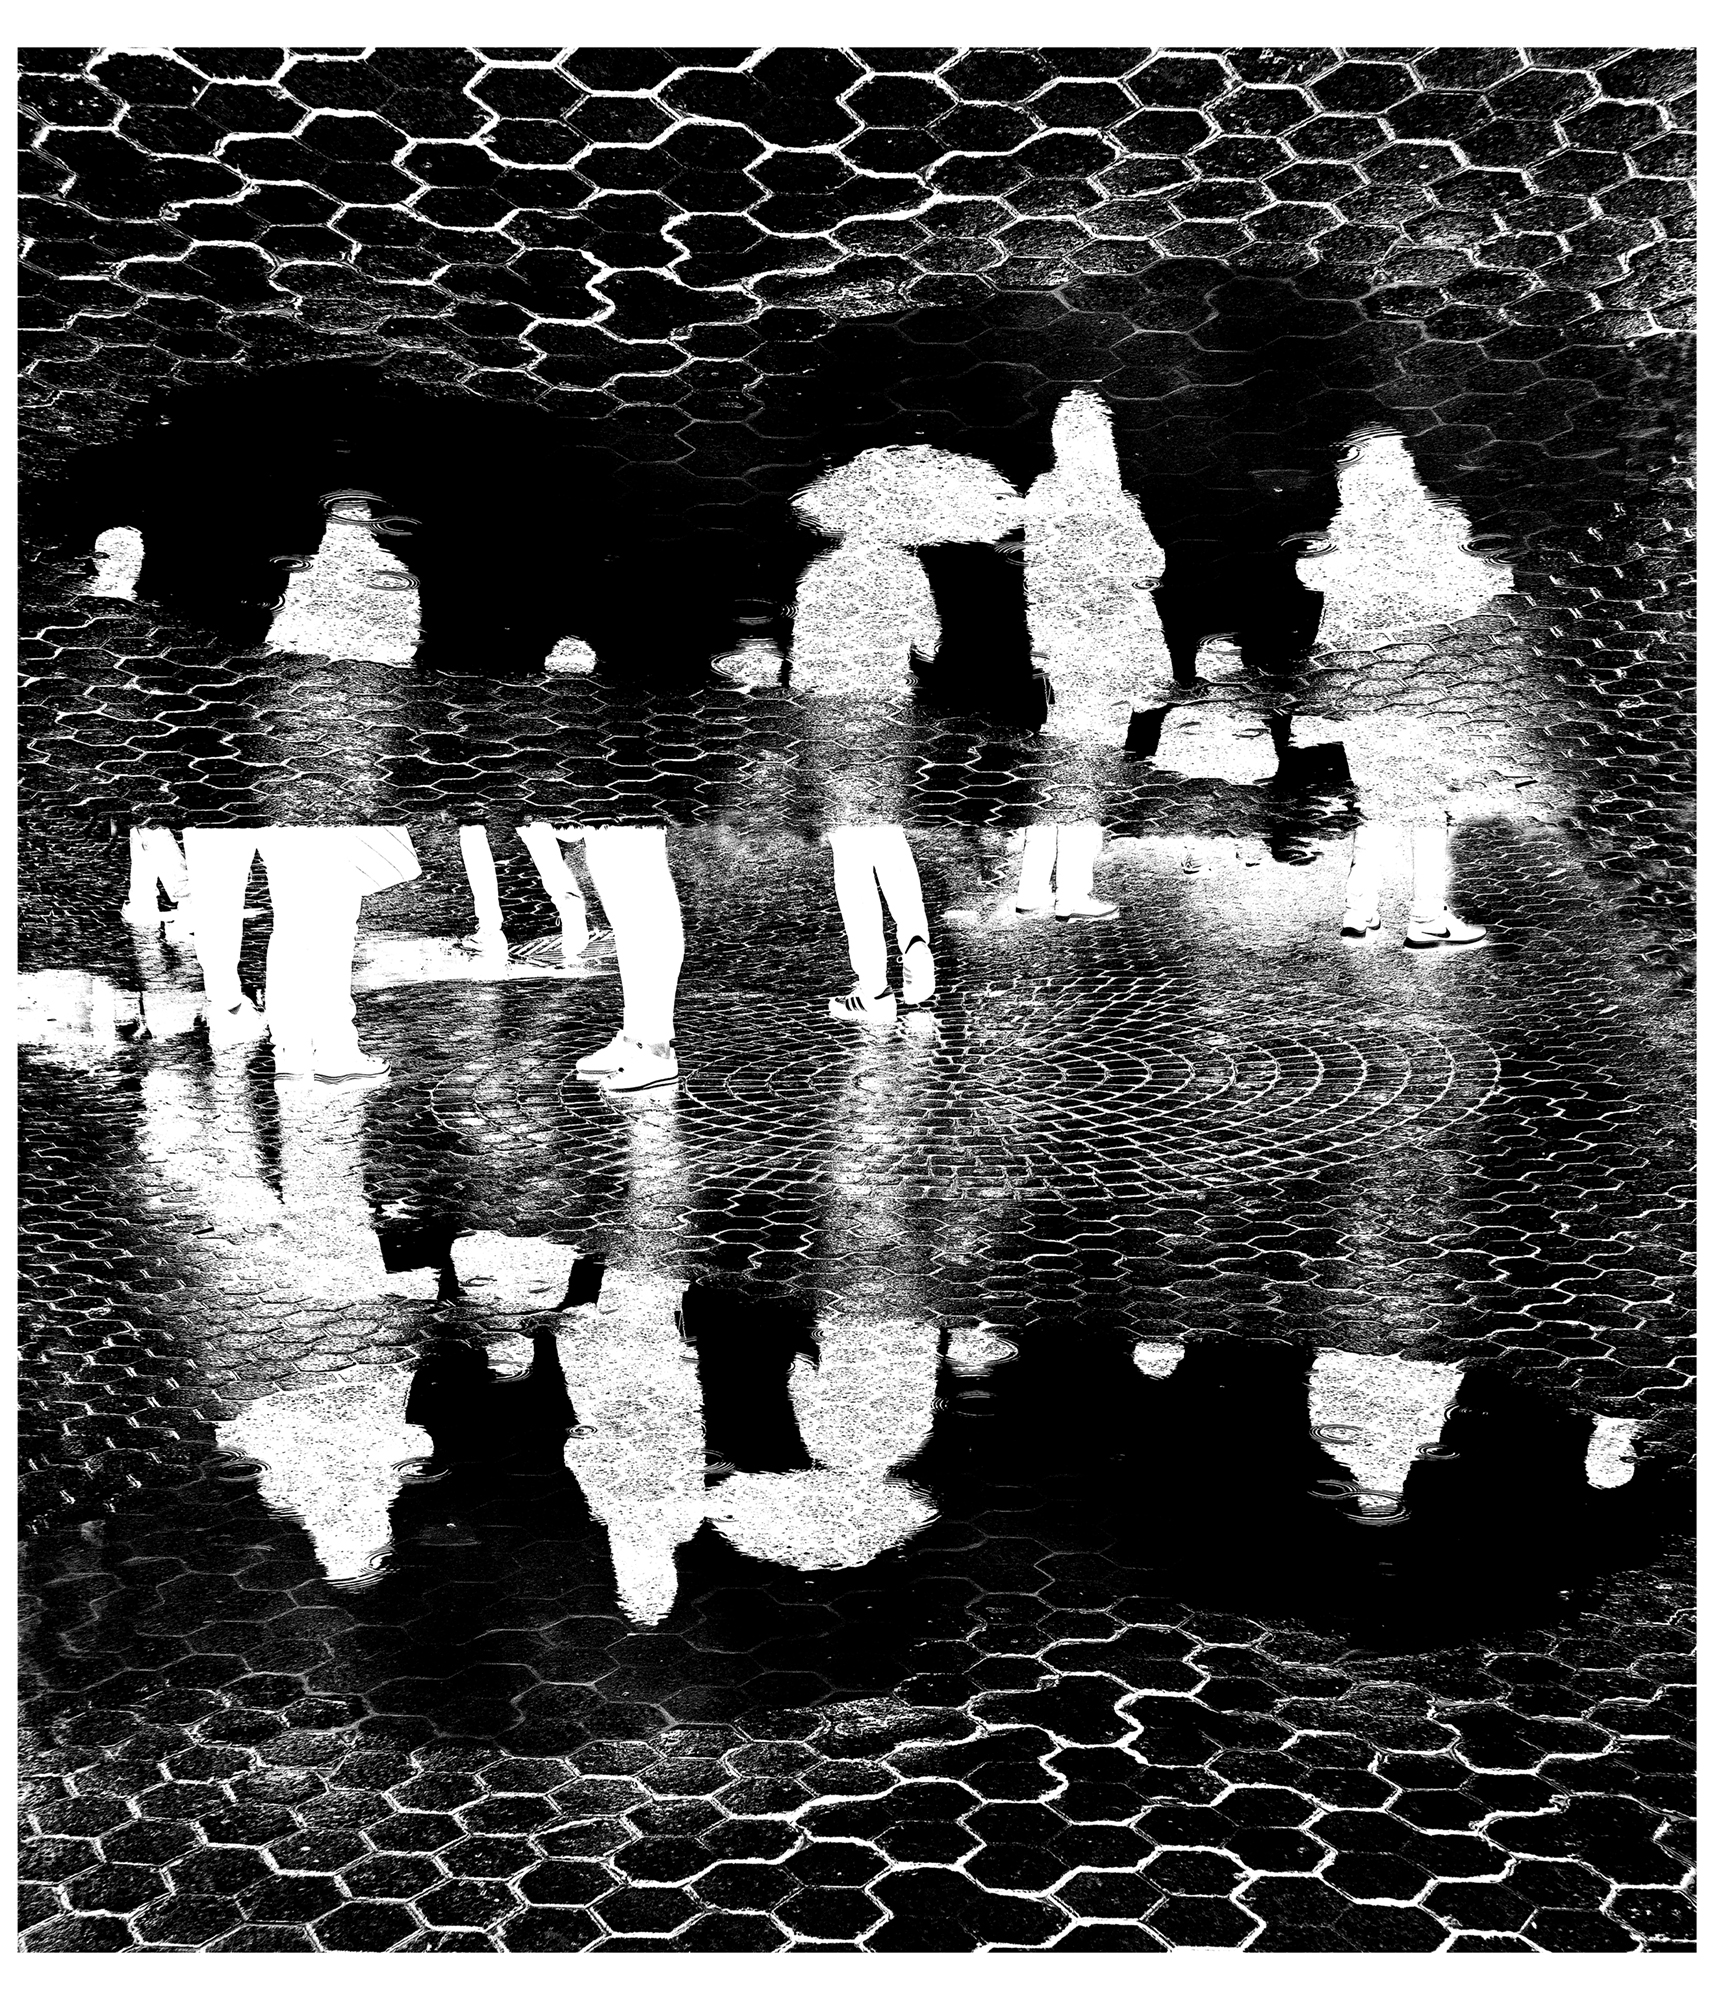 Photograph of people reflected in a puddle of water by Lissette Solórzano Title: Untitled / Sin título; Baryta archival fine art print; 100 x 80 cm; 2023